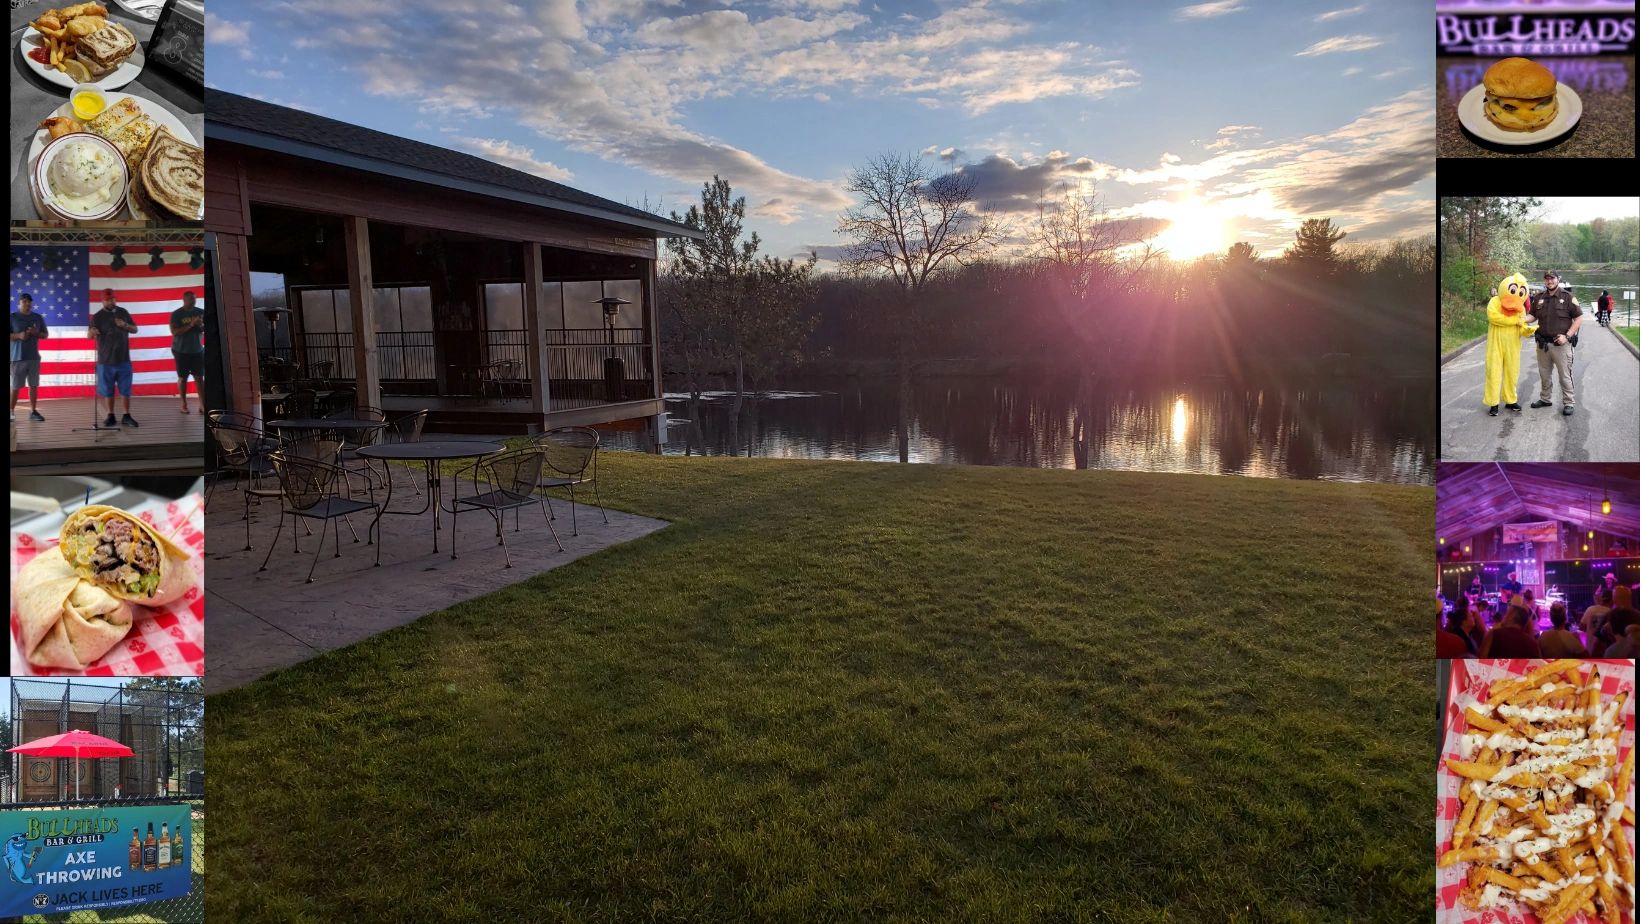 Picture of the patio overlooking the river at sunset